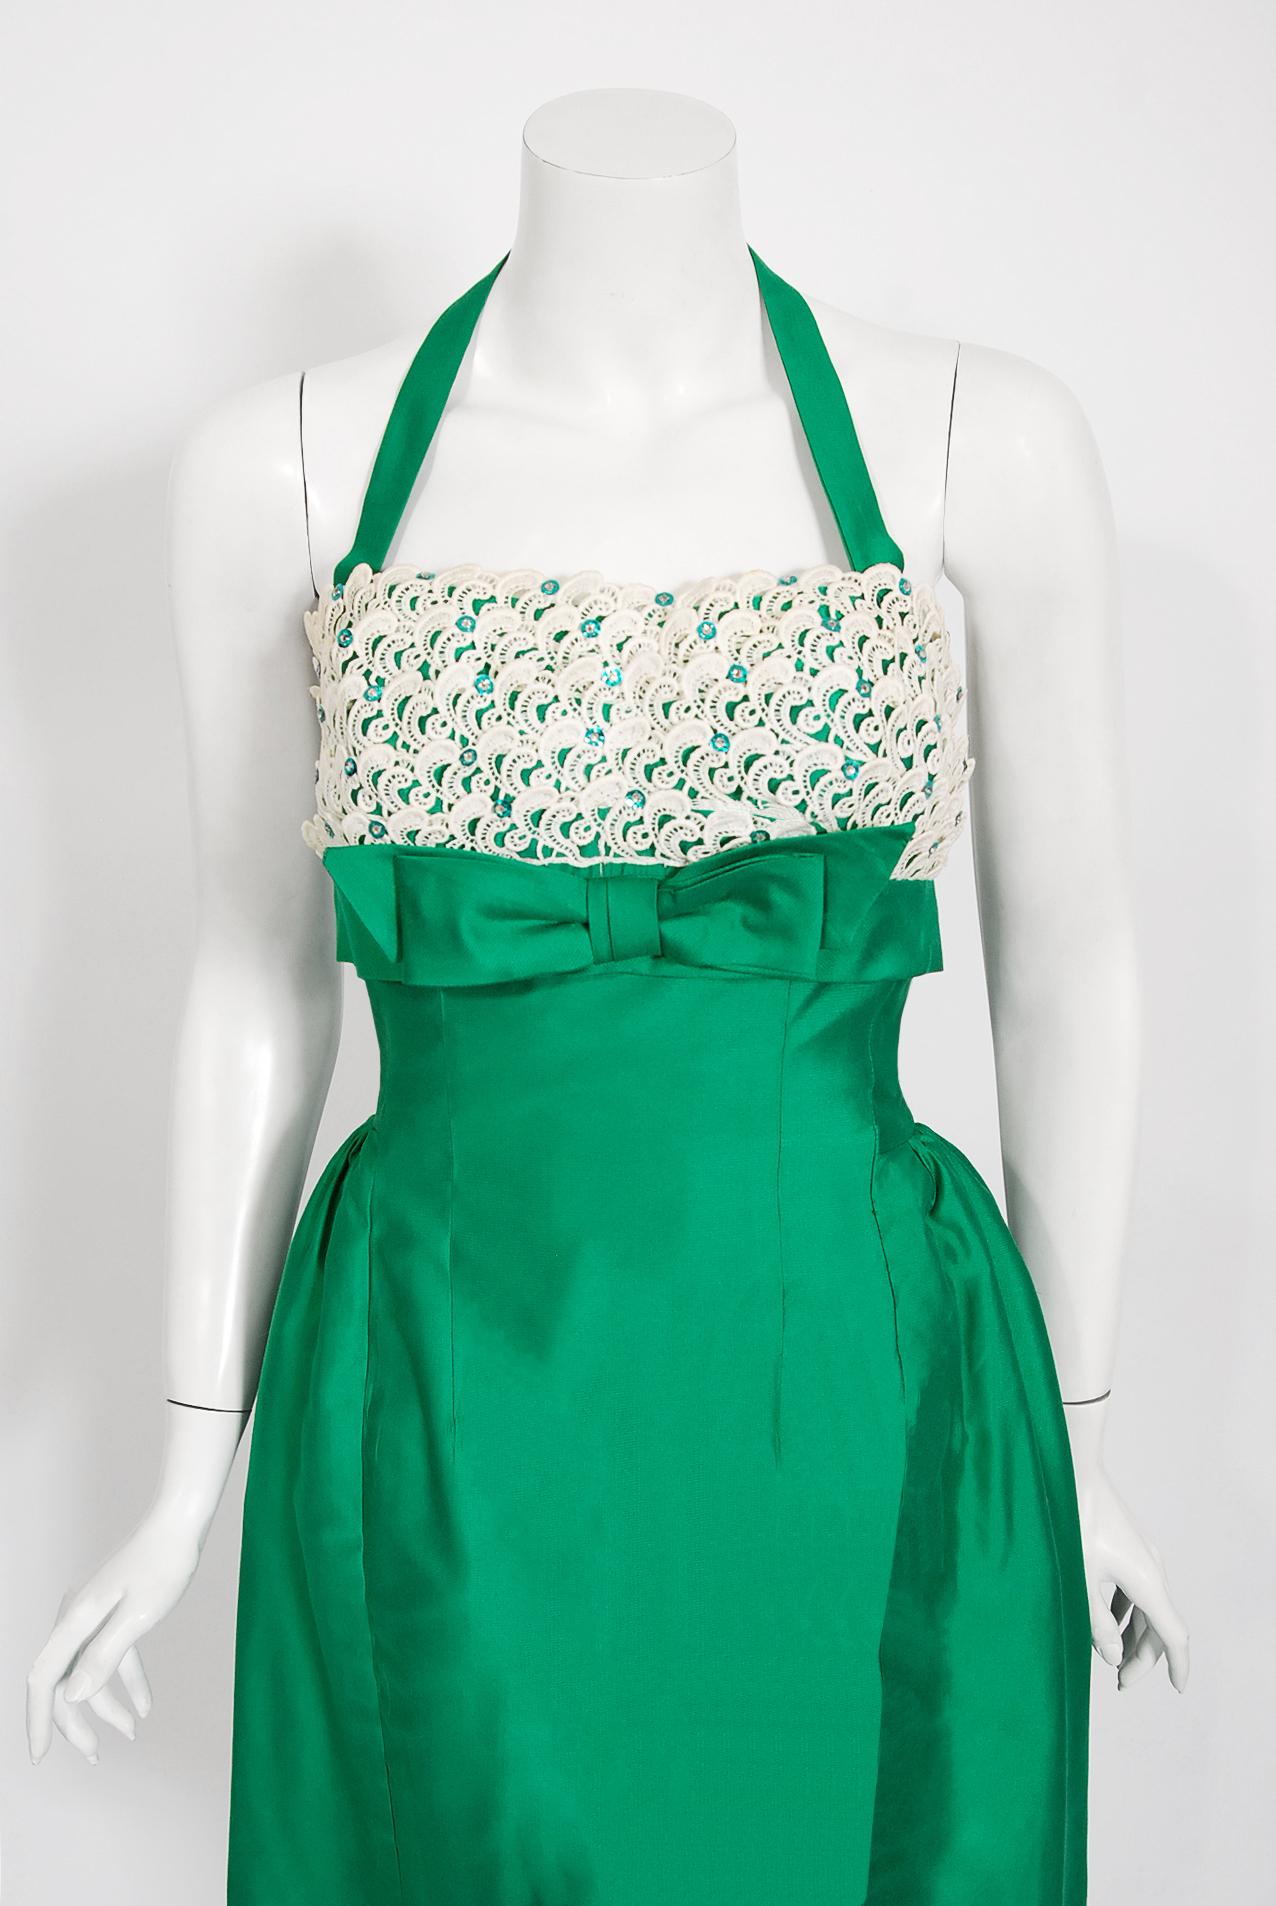 An amazing and highly stylized 1950's emerald green dress by the Lou-Ette California designer label. This gorgeous garment is fashioned from a luxurious polished cotton silk blend with white lace trimming. The silhouette is classic pin-up 